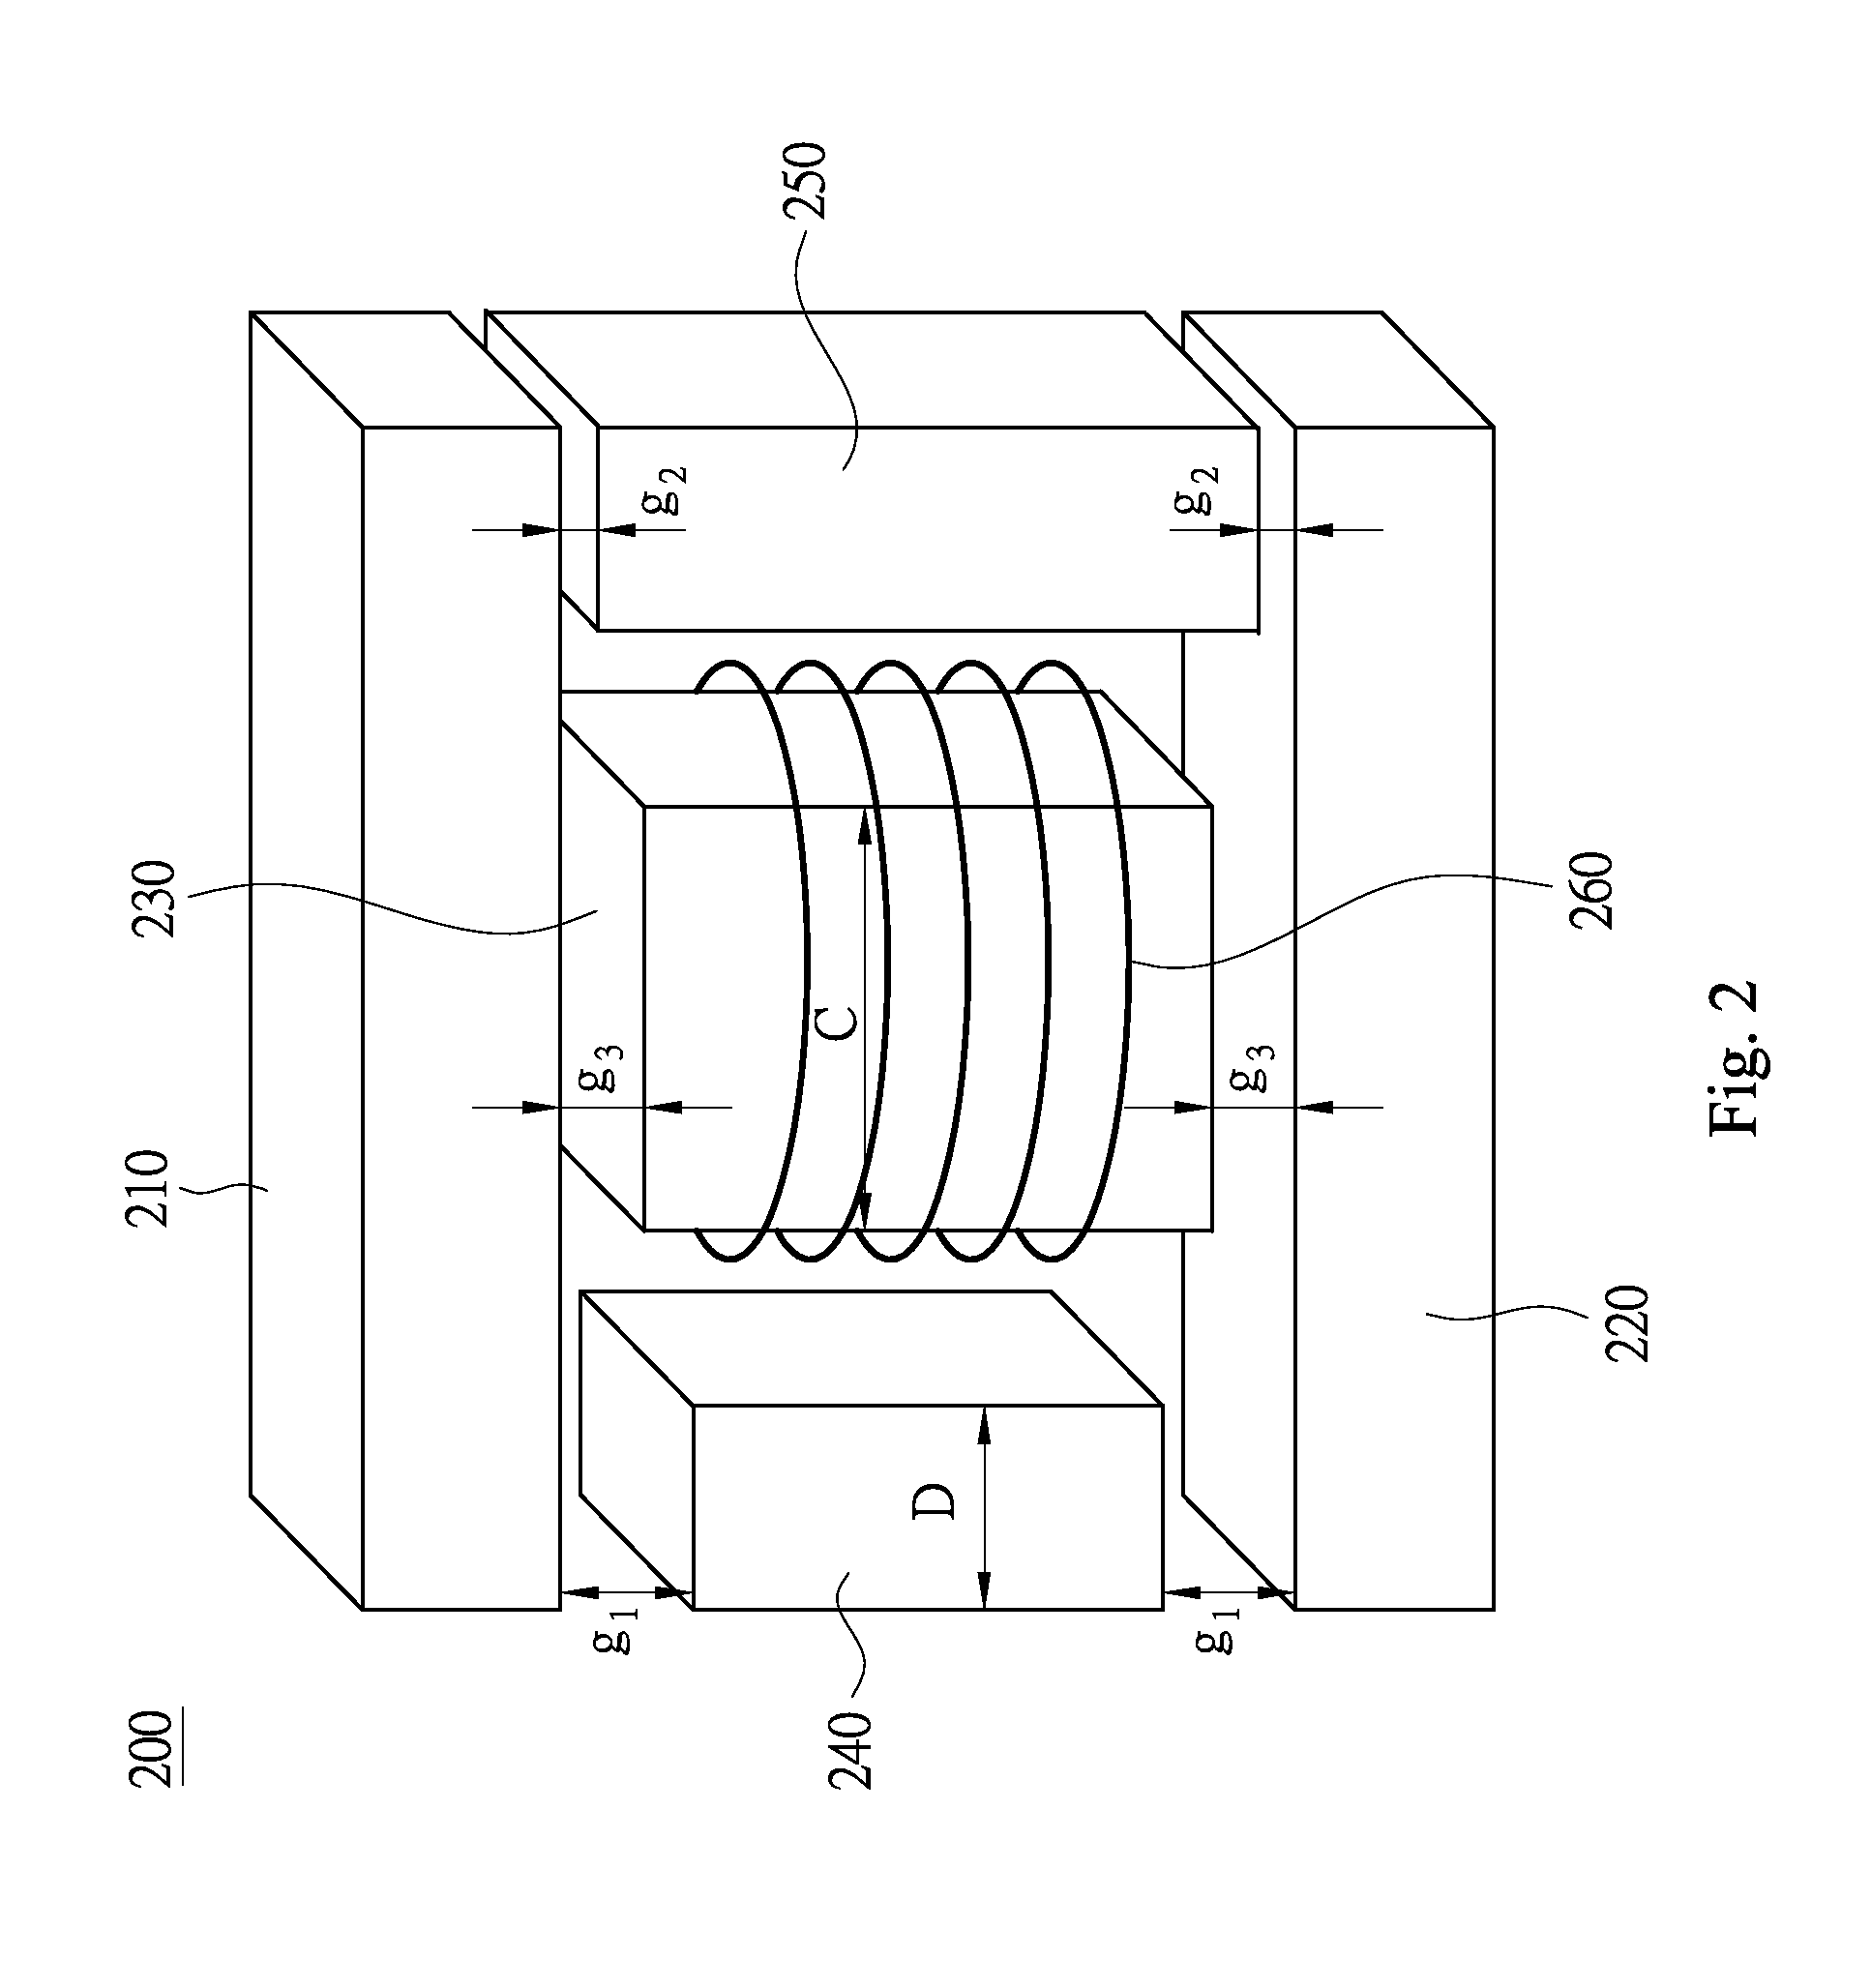 Nonlinear inductor